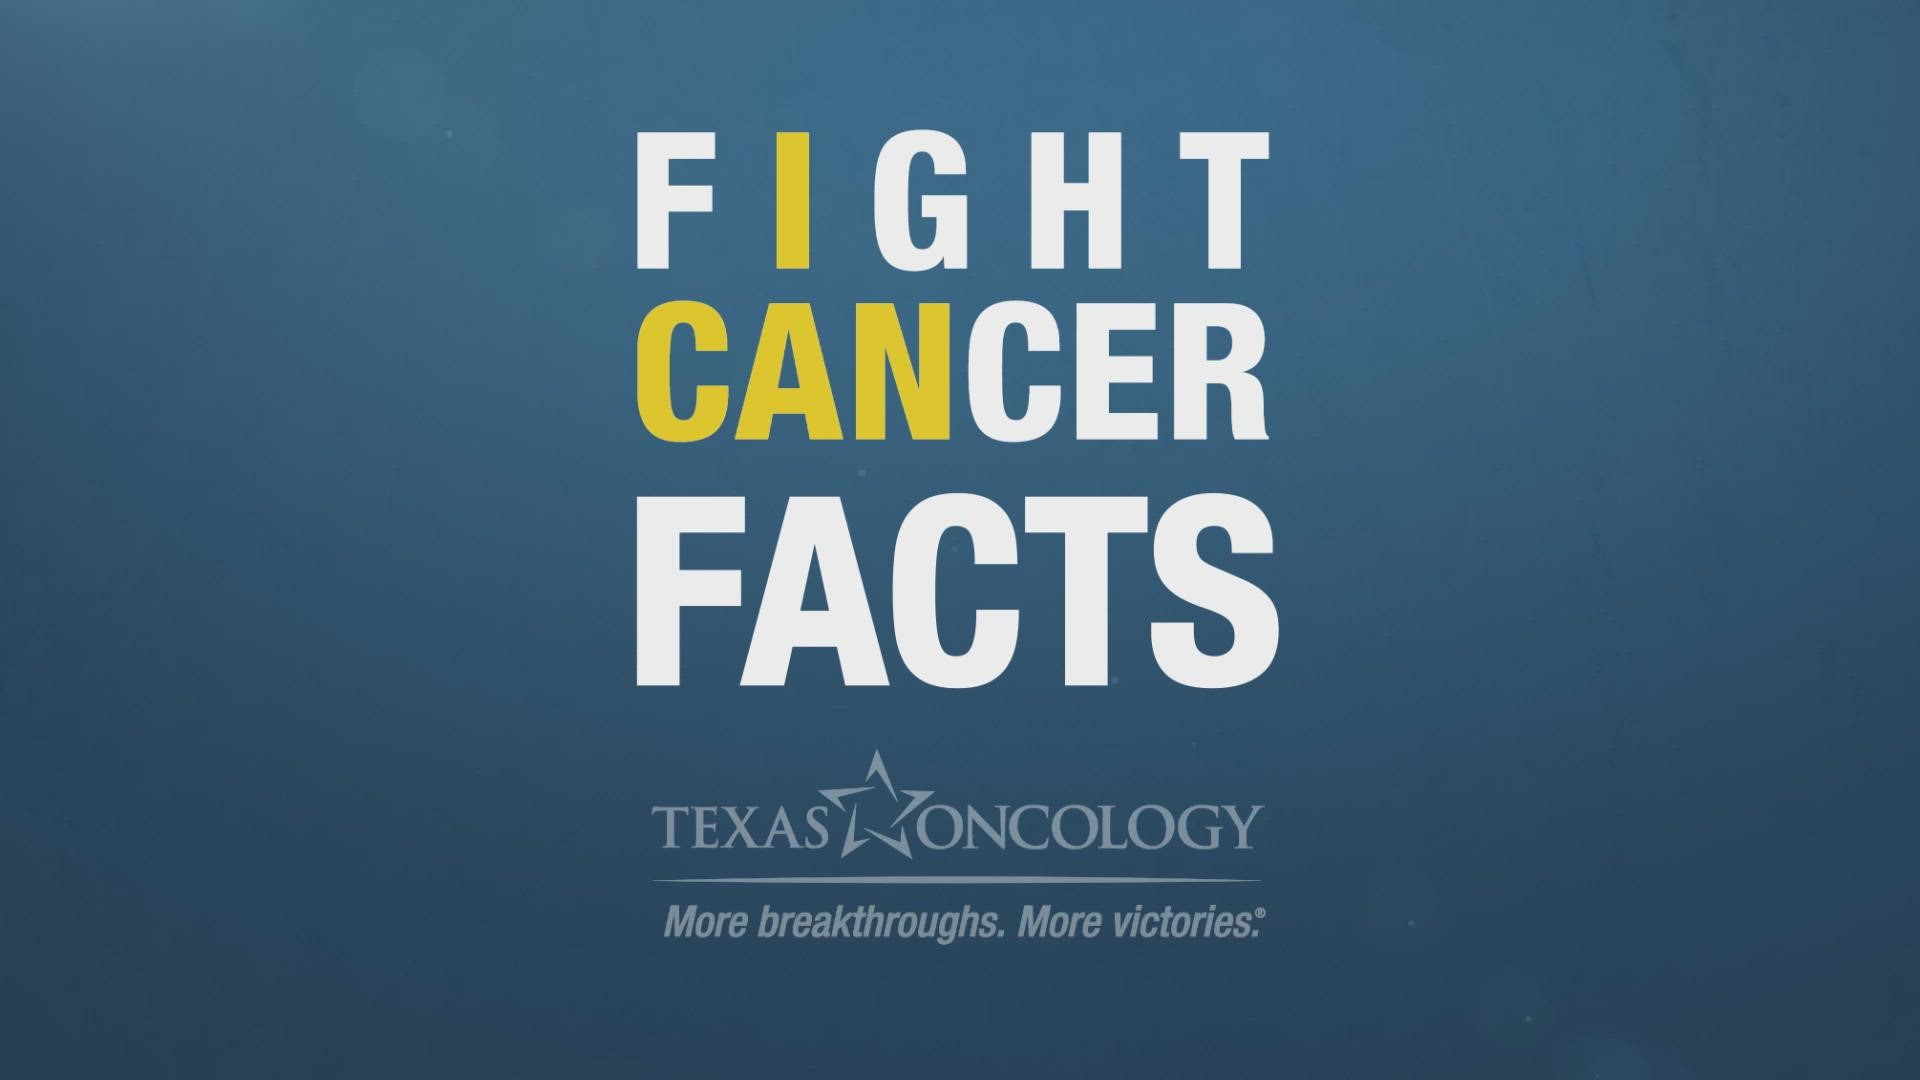 Local Texas Oncology doctor shares how to reduce the risk of breast cancer, which is the most diagnosed cancer in American women.